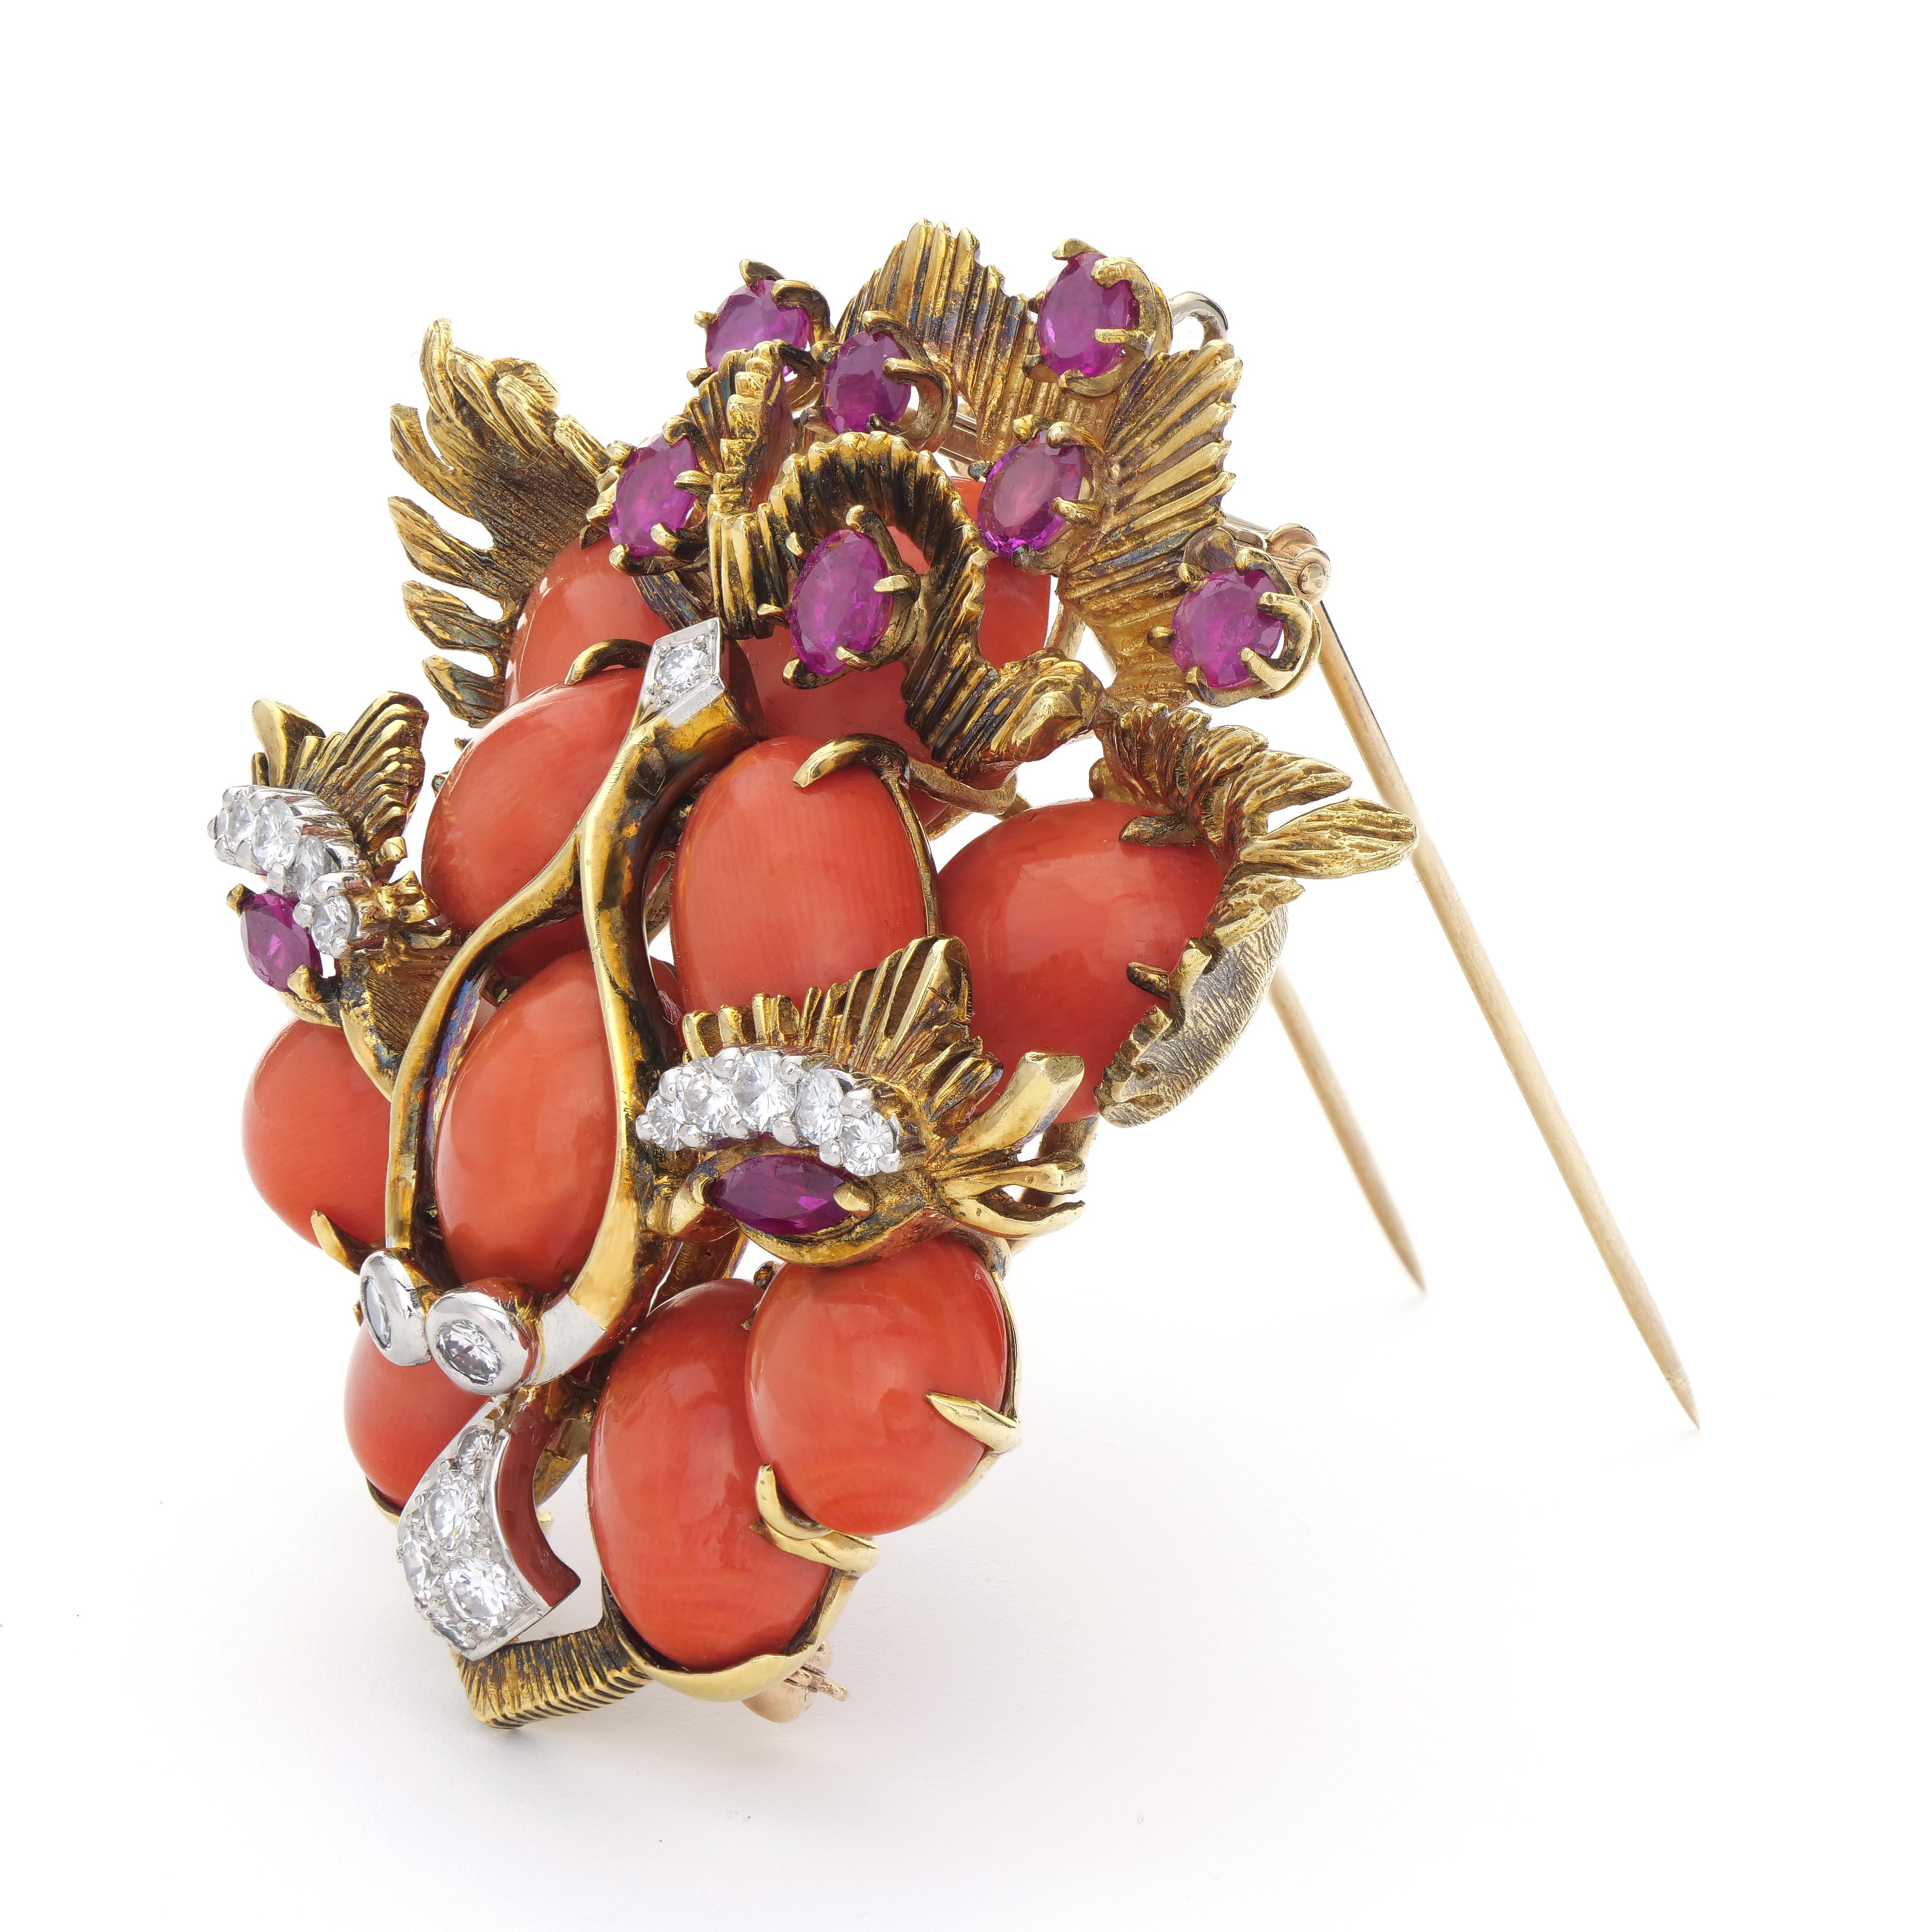 The bold cat design is a truly whimsical work of art.  Textured gold and bright orange coral are so 1960s and the rubies and diamonds give just the right amount of sparkle.  This one of a kind piece will become your go to brooch when you want a